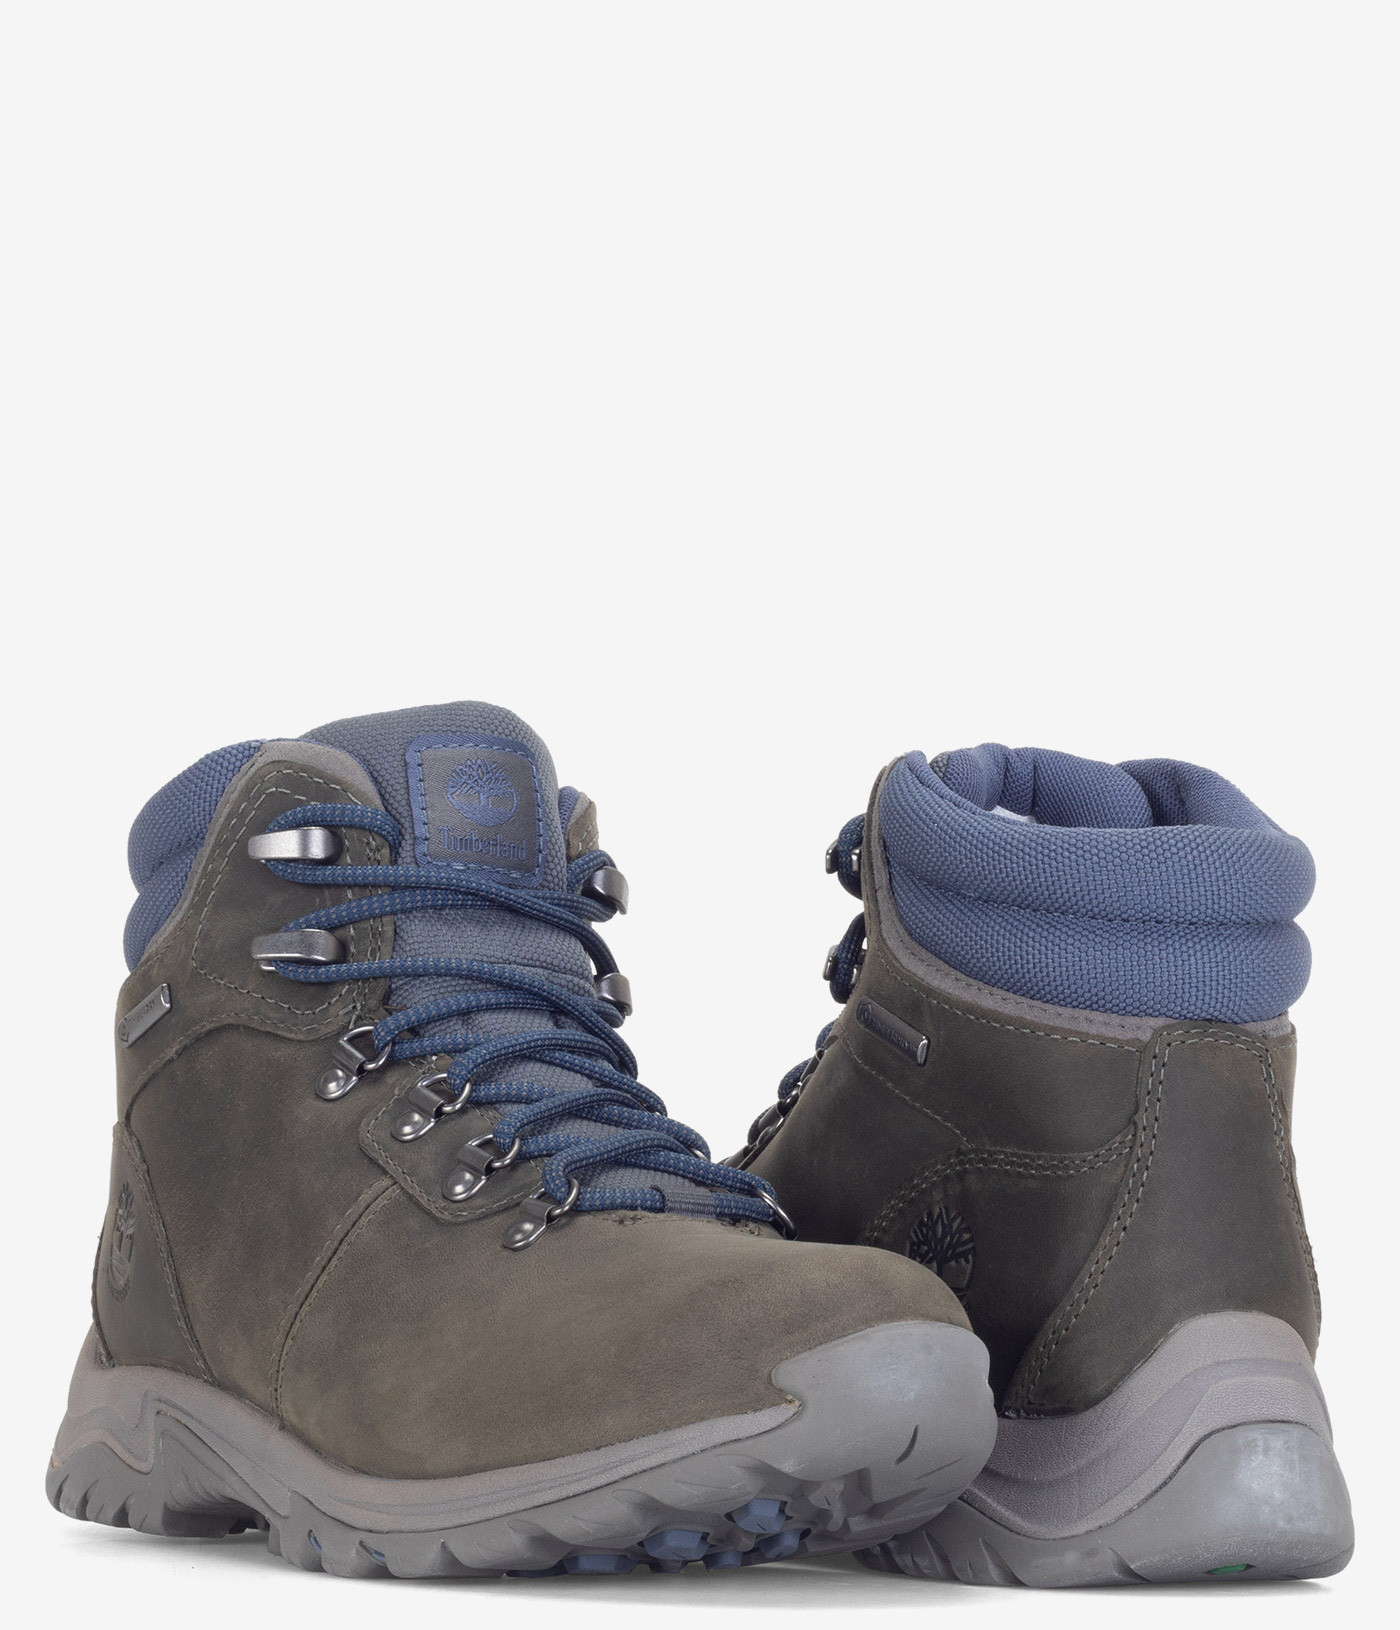 Timberland Mt. Maddsen Valley Mid Waterproof Hiking Boot